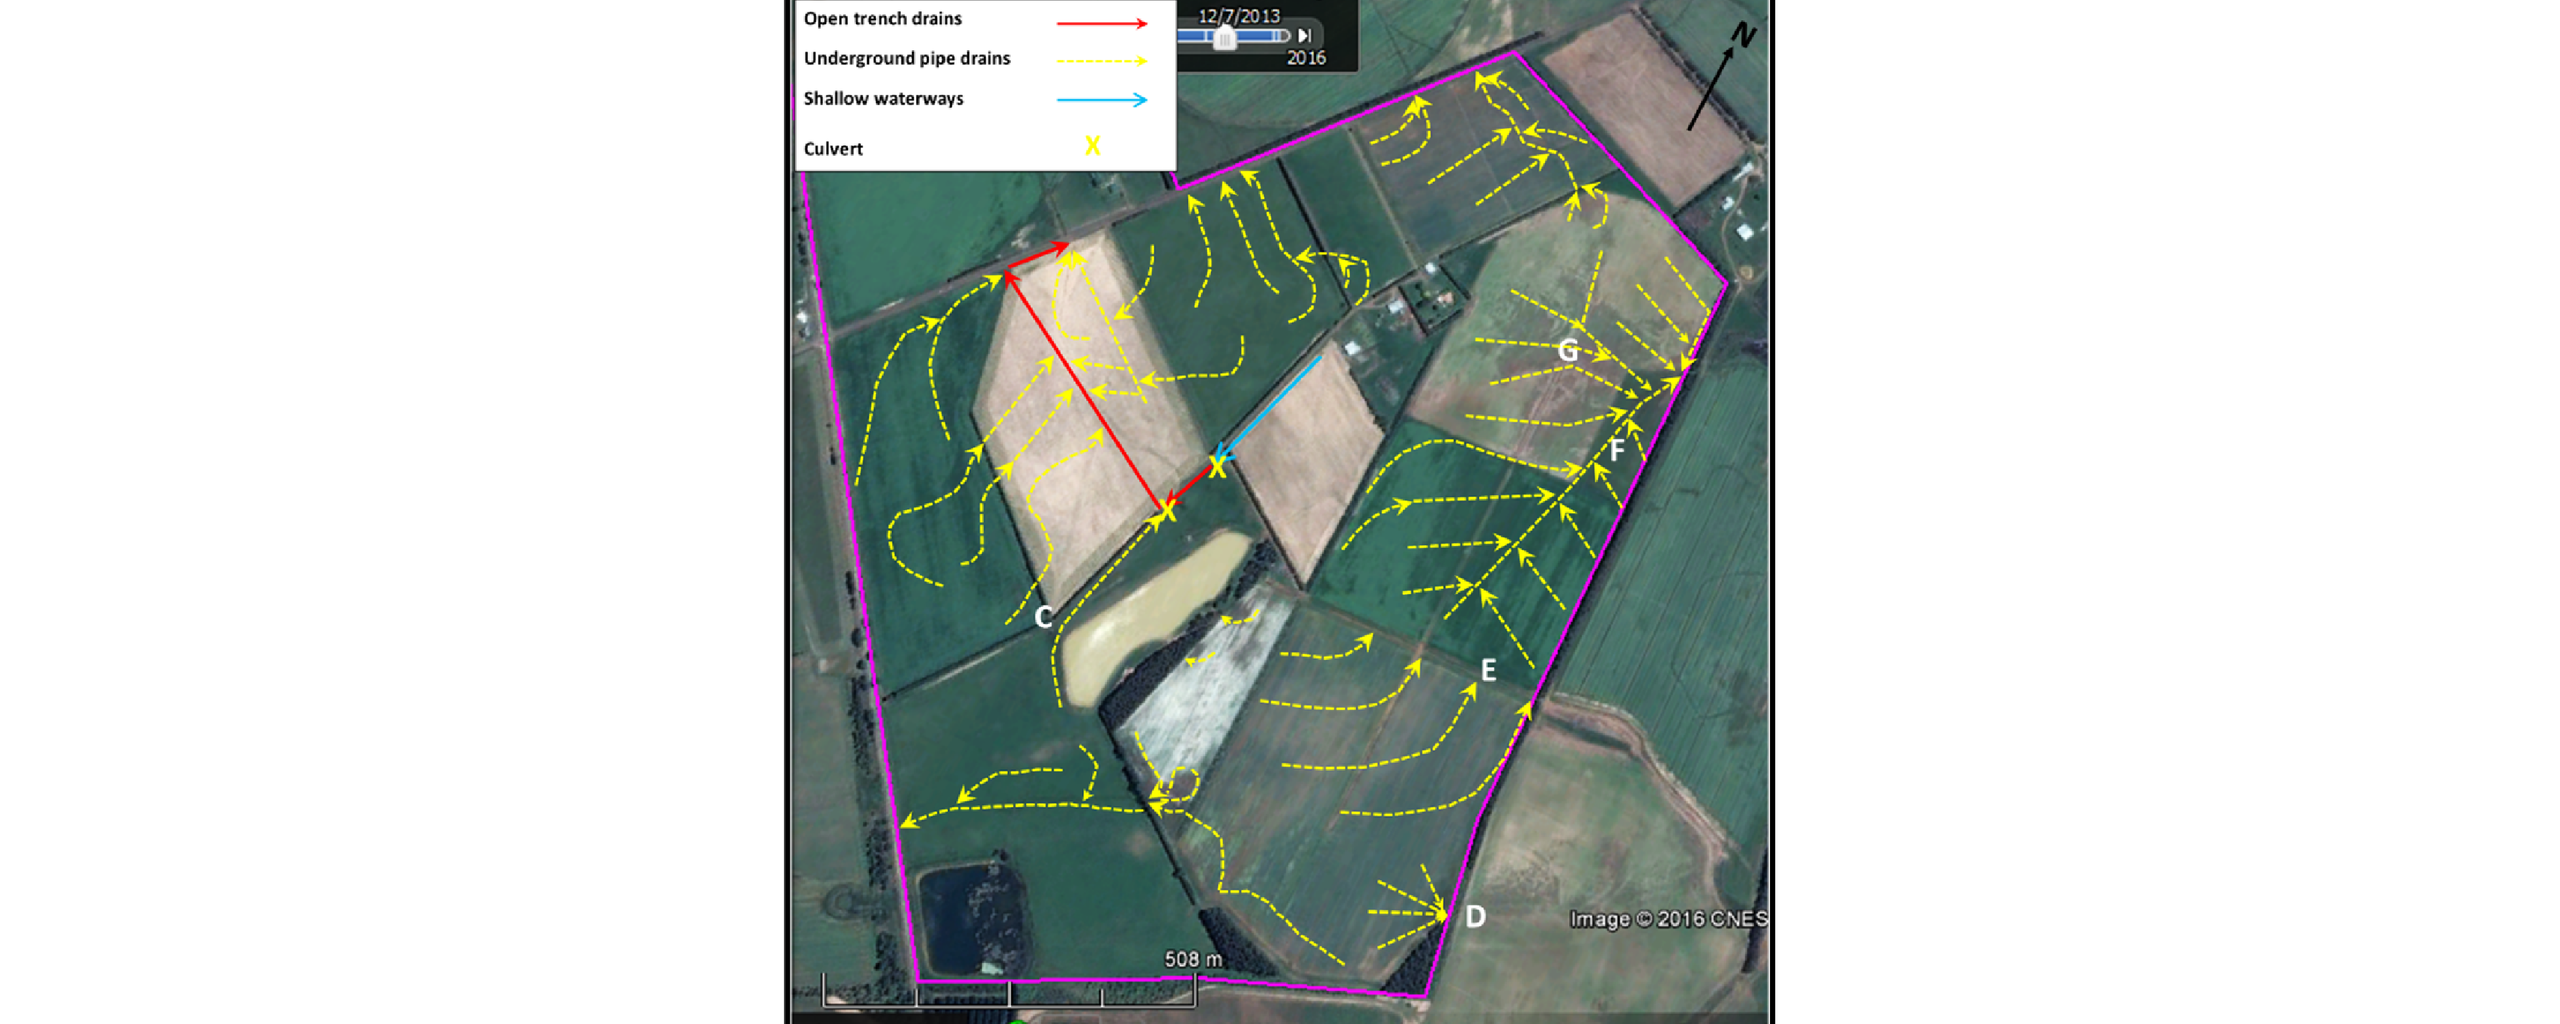 Figure 12. An image from Google Earth used in farm drainage planning.